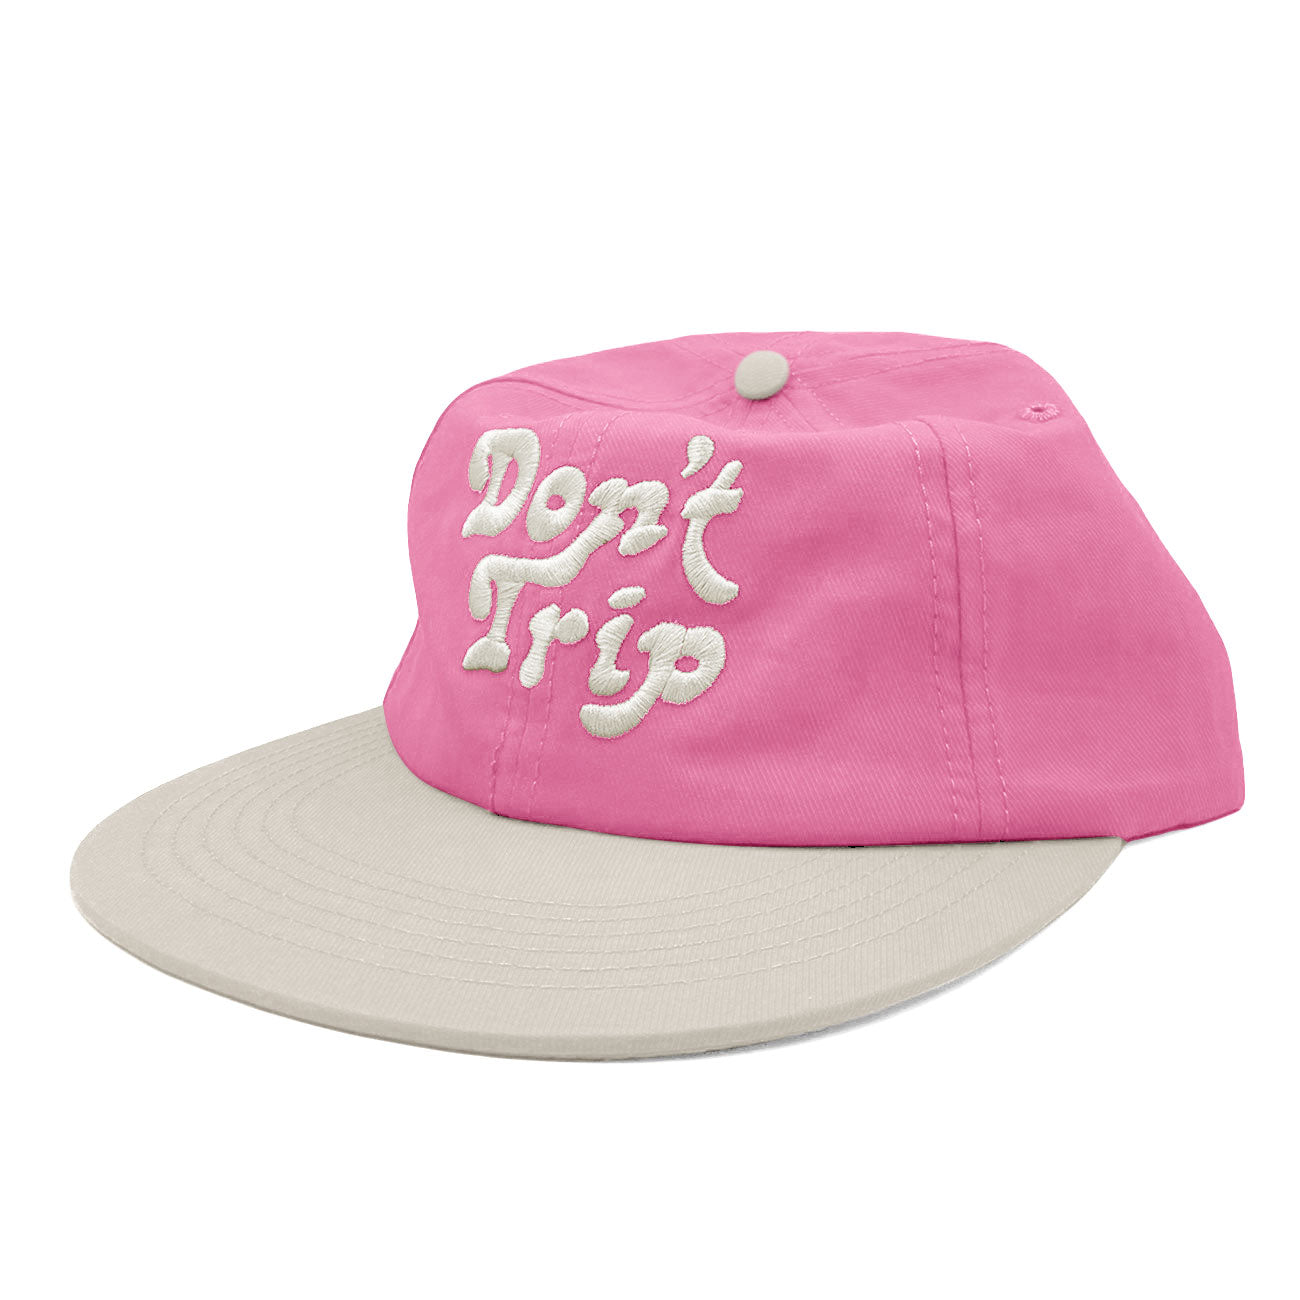 Don't Trip pink hat white brim with white embroidered Don't Trip logo on white background, front - Free & Easy